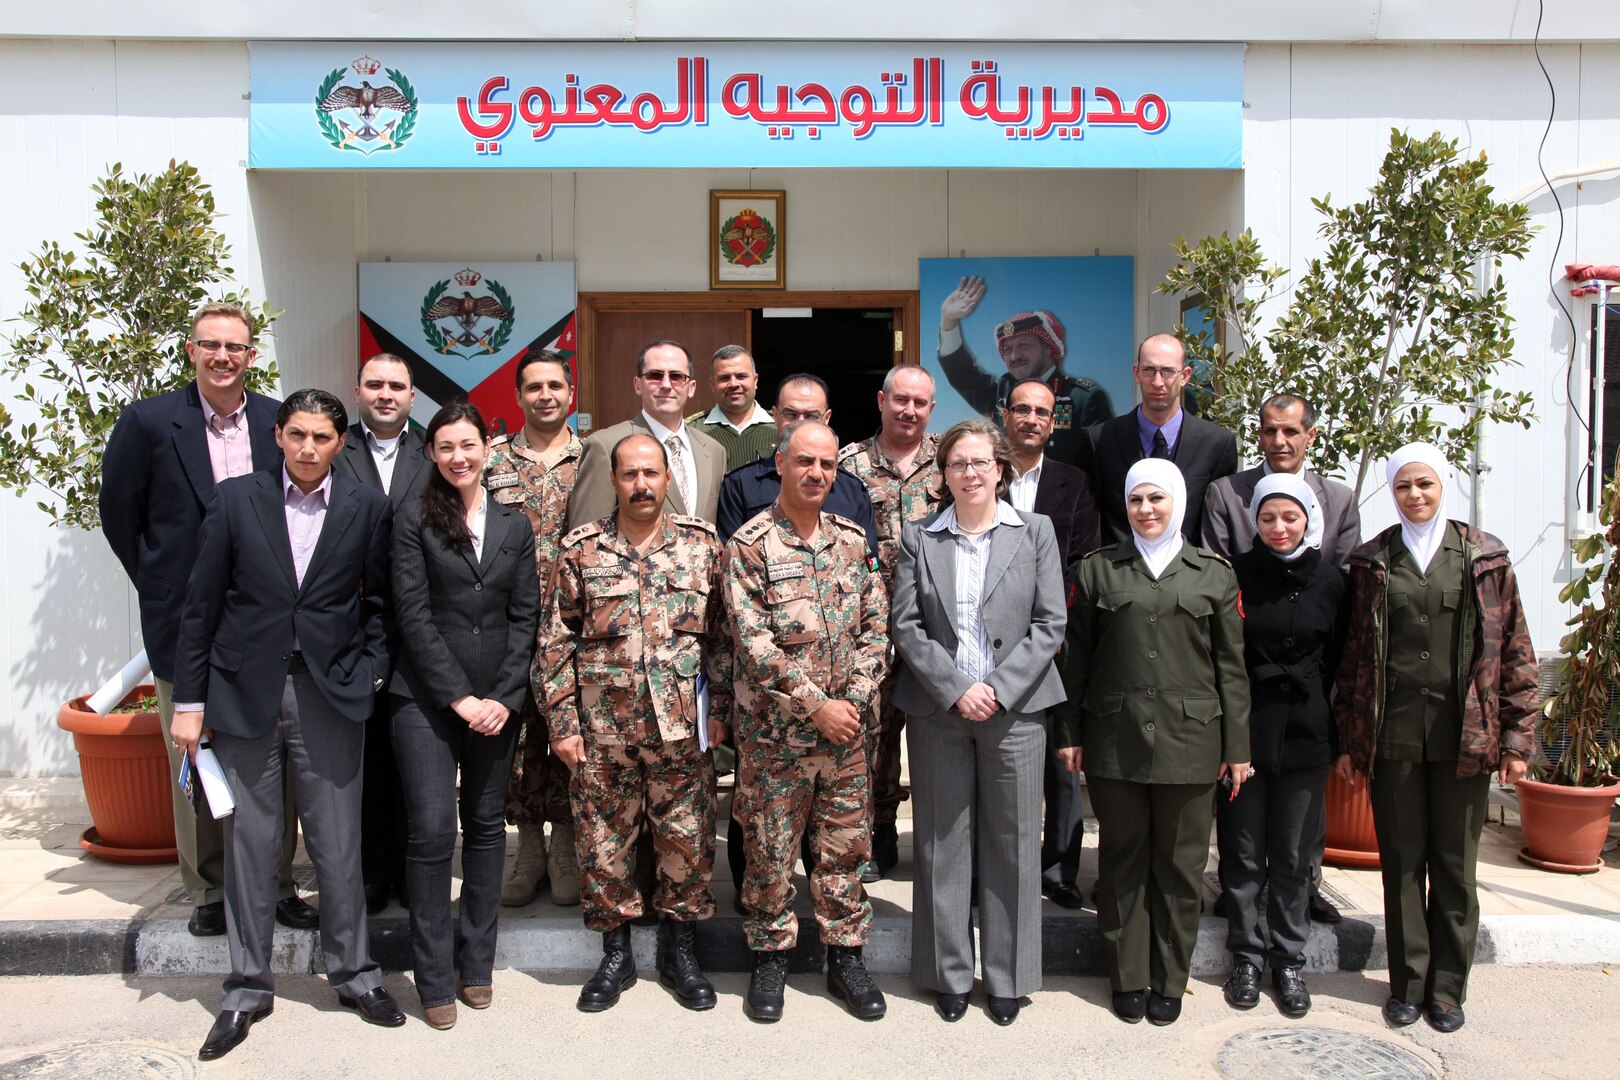 During a transformative time throughout the Middle East credited mostly to the use of social media, the first-ever U.S. Central Command Public Affairs exchange with the Jordan Armed Forces occurred March 23 to 30, 2012 as part of the National Guard's State Partnership Program. Members of the Jordanian Armed Forces, Jordanian Media, and Colorado National Guard pose for a group shot following the conclusion of the exchange.